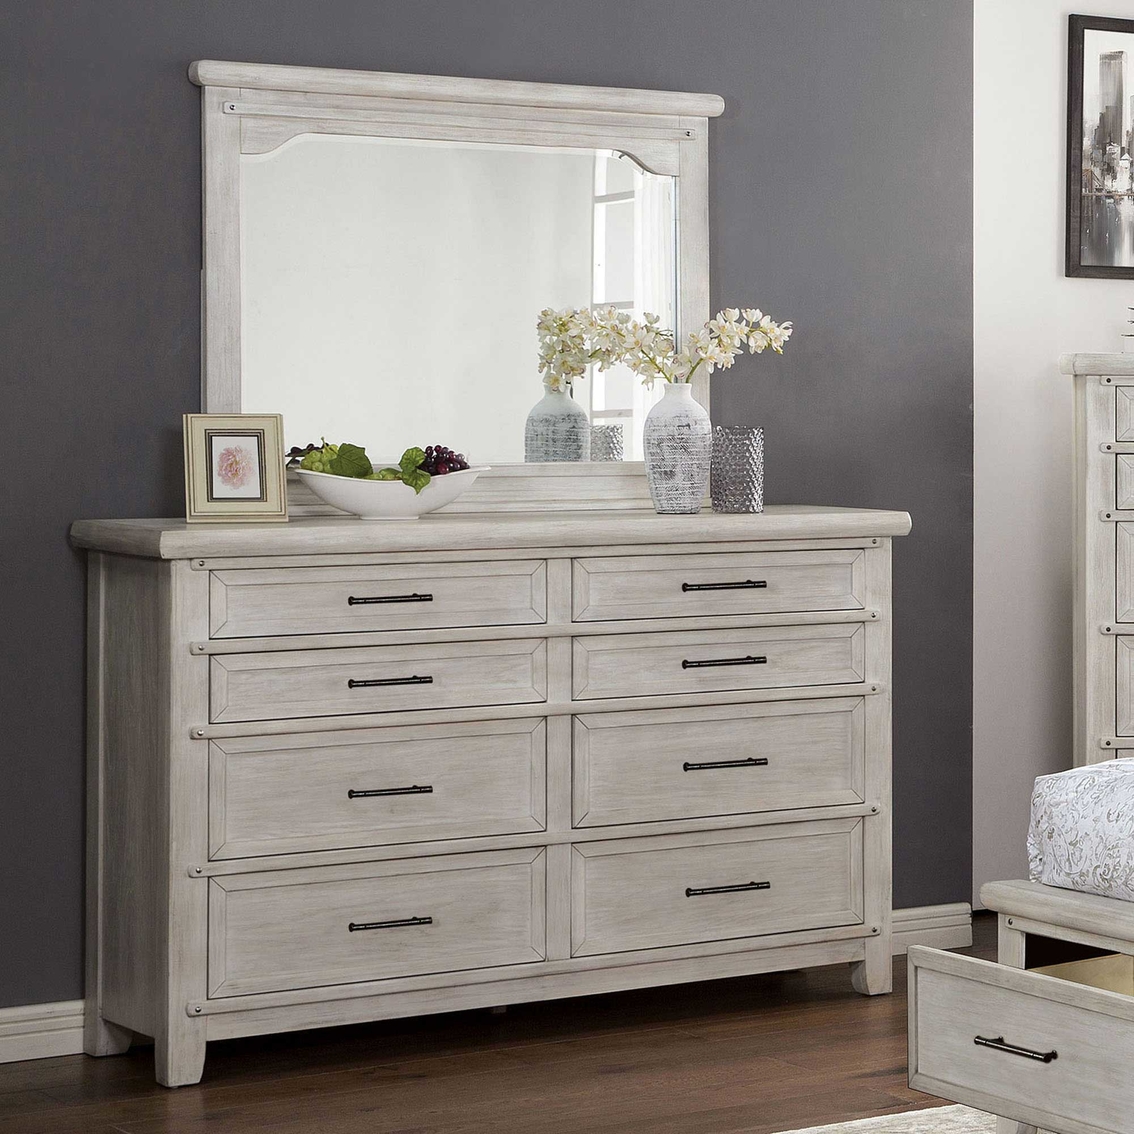 Furniture Of America Shawnette Collection 8 Drawer Dresser And Mirror ...